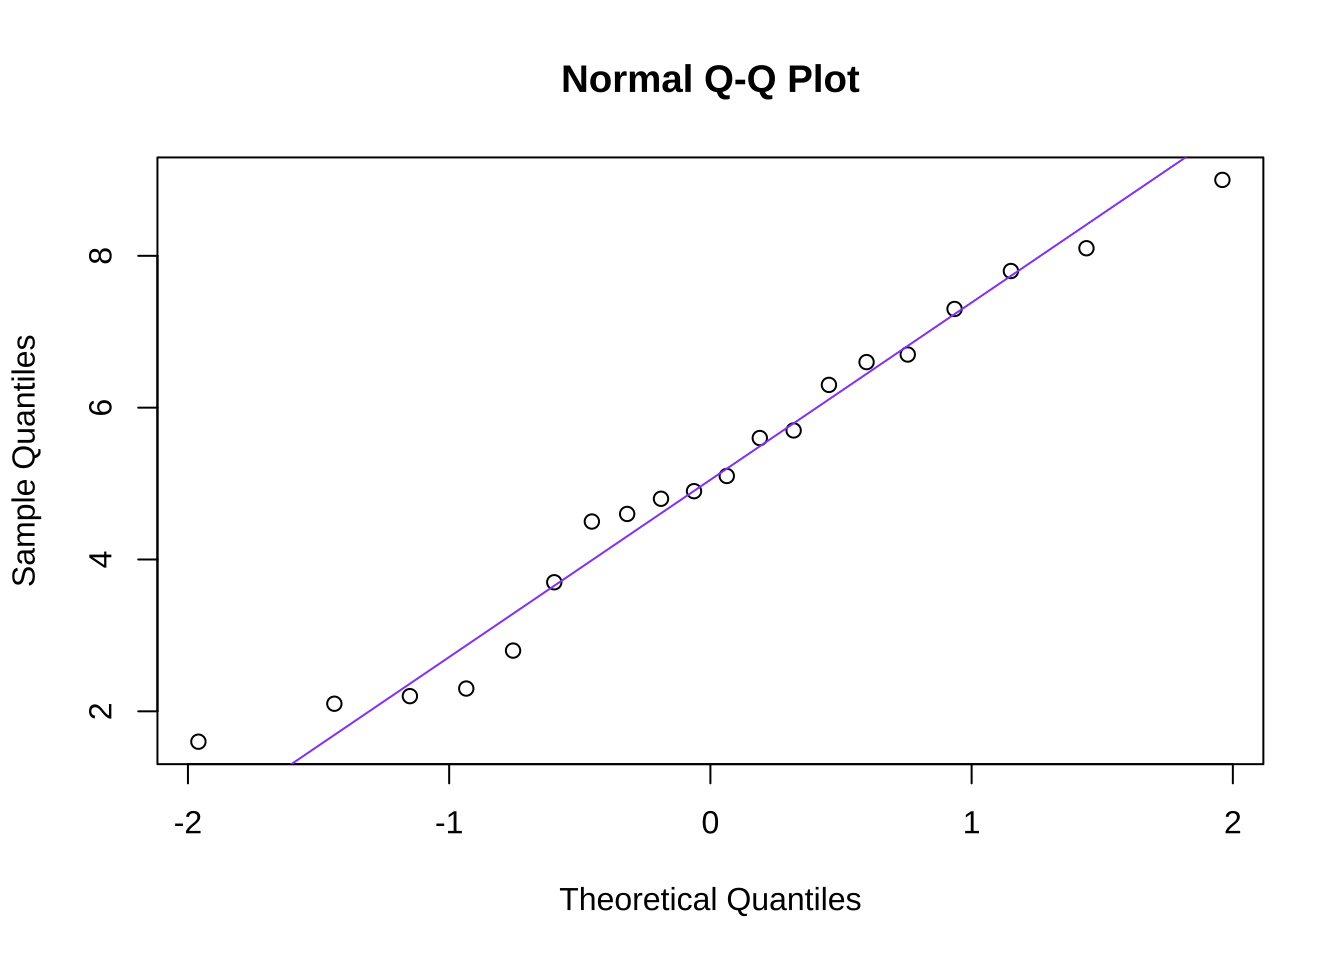 Quantile-Quantile Plot of the Goodness-of-Fit Between the Made-up Data and a Normal Distribution